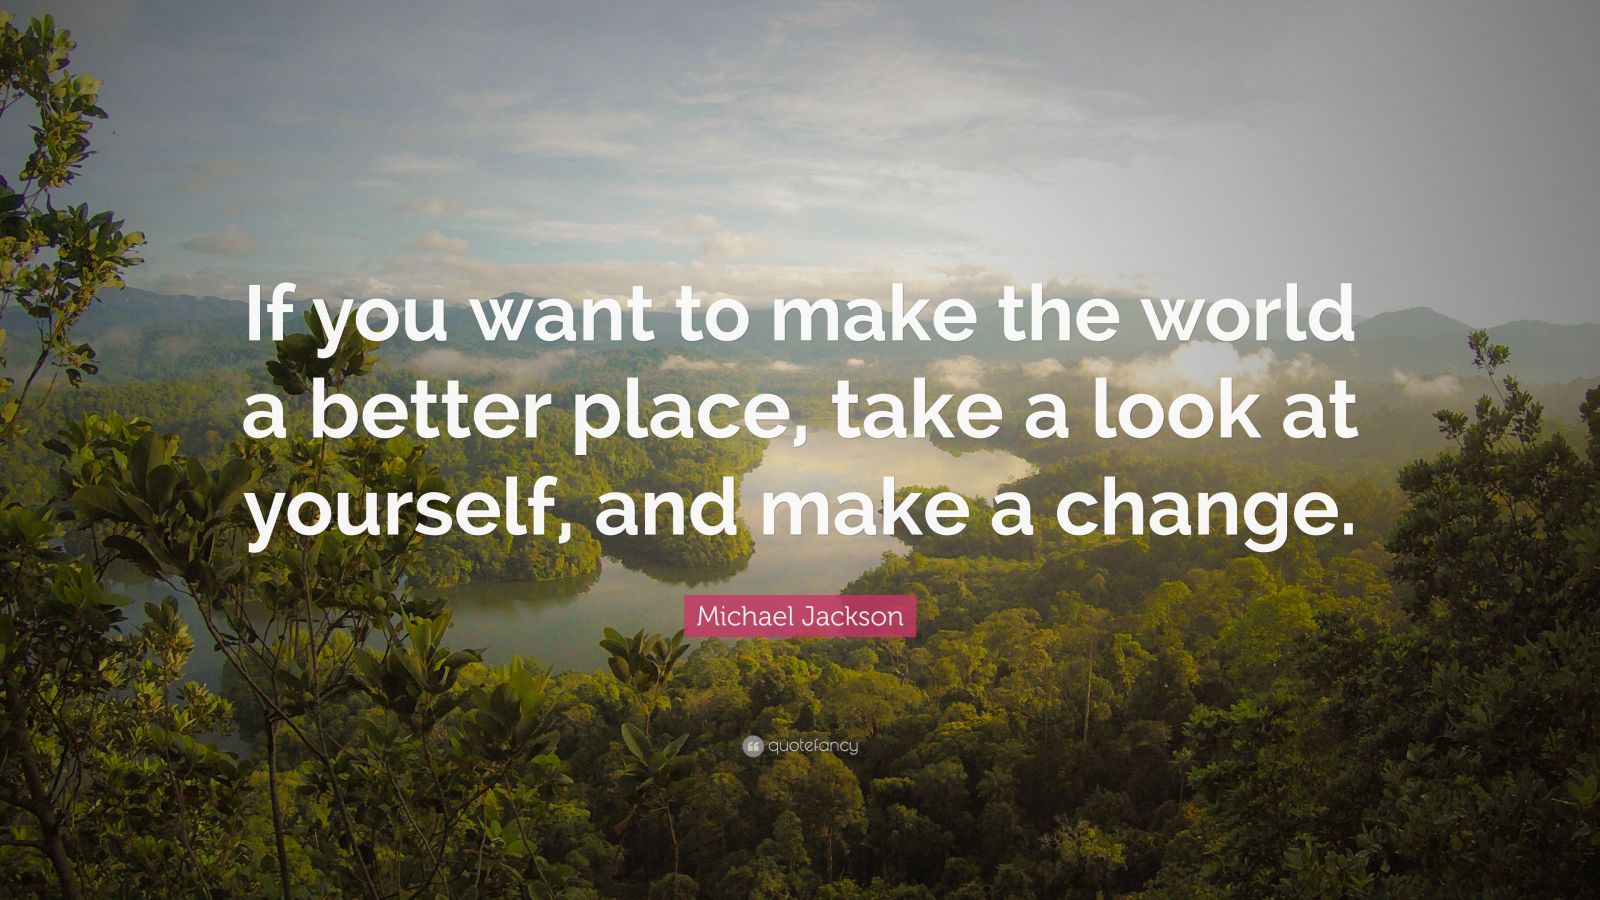 Michael Jackson Quote: “If you want to make the world a better place